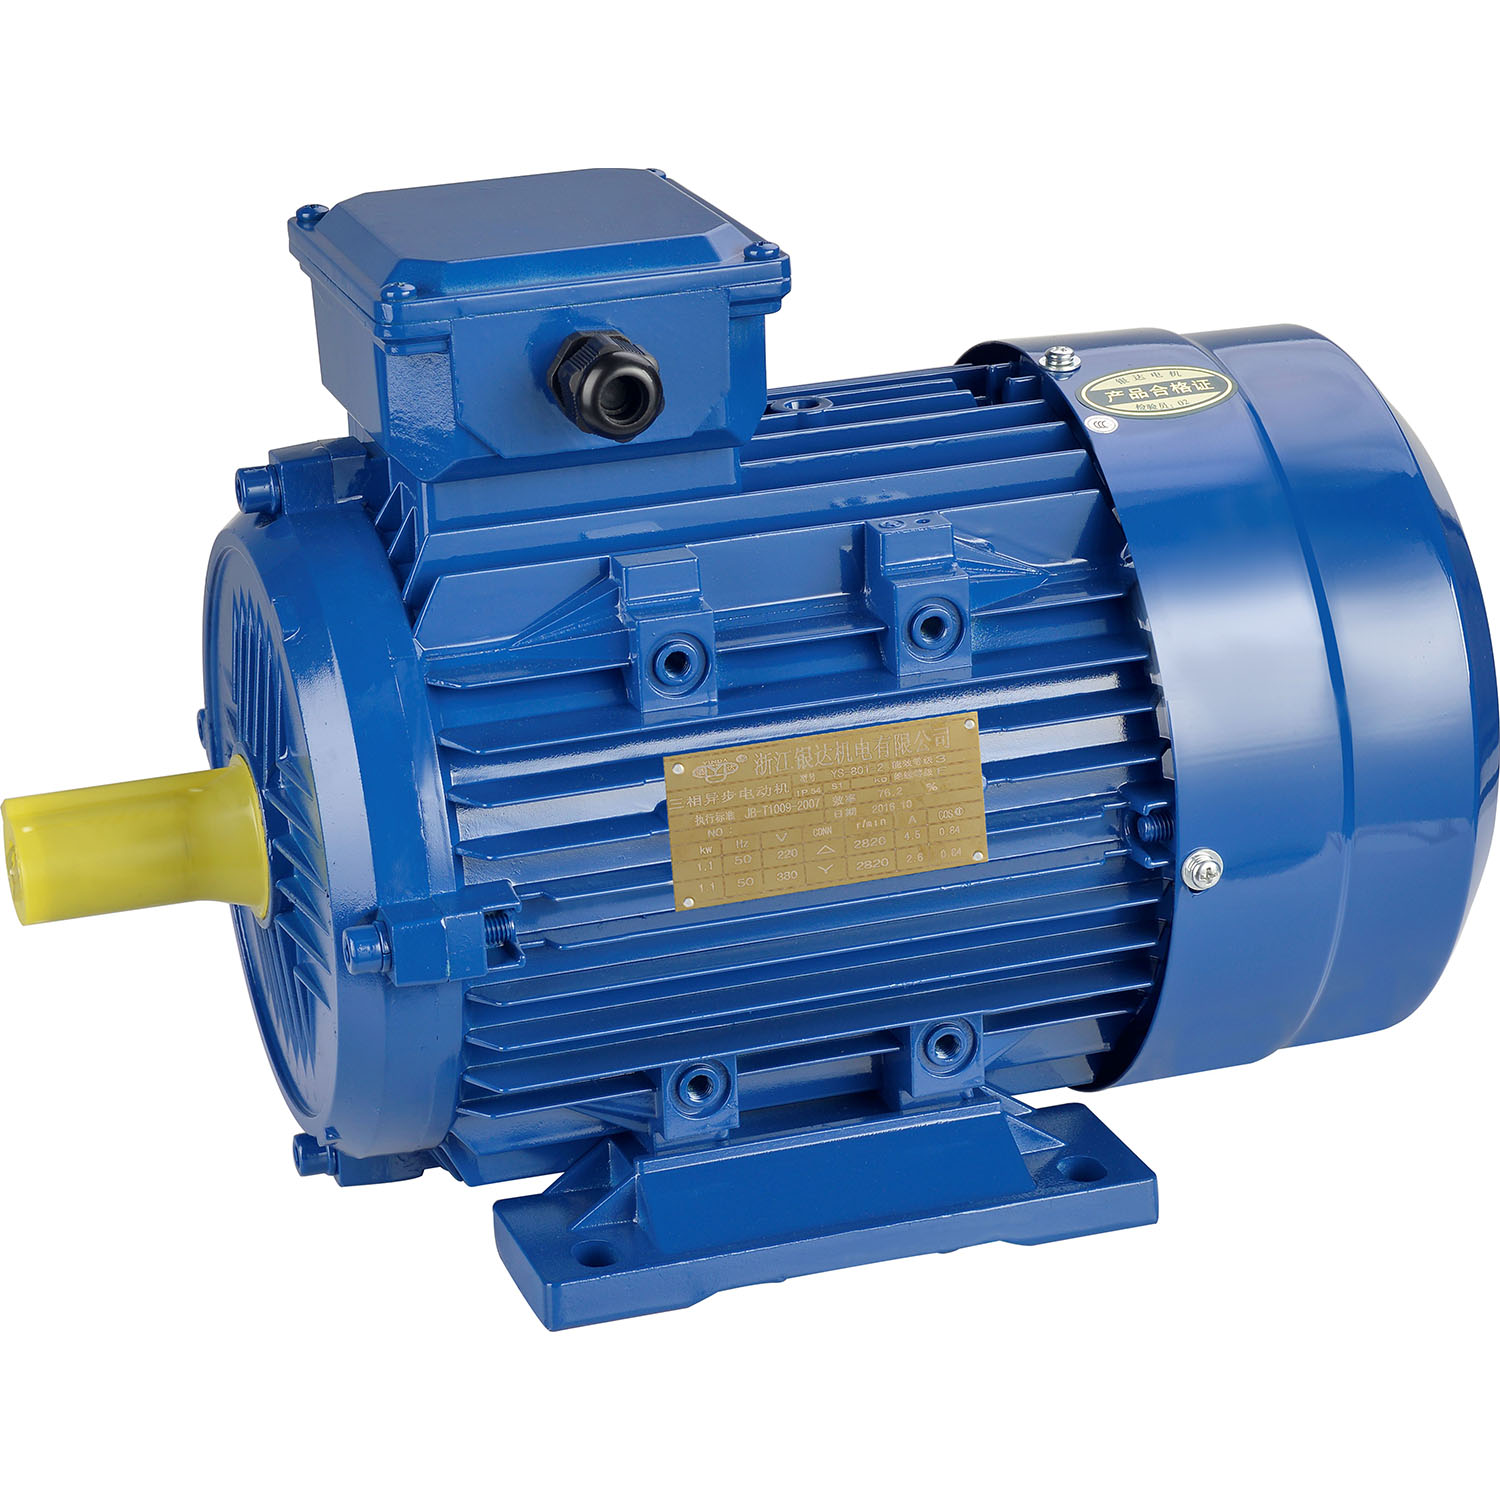 Y2(YS YX3 MS) aluminum cylinder series high efficiency three-phase asynchronous motor